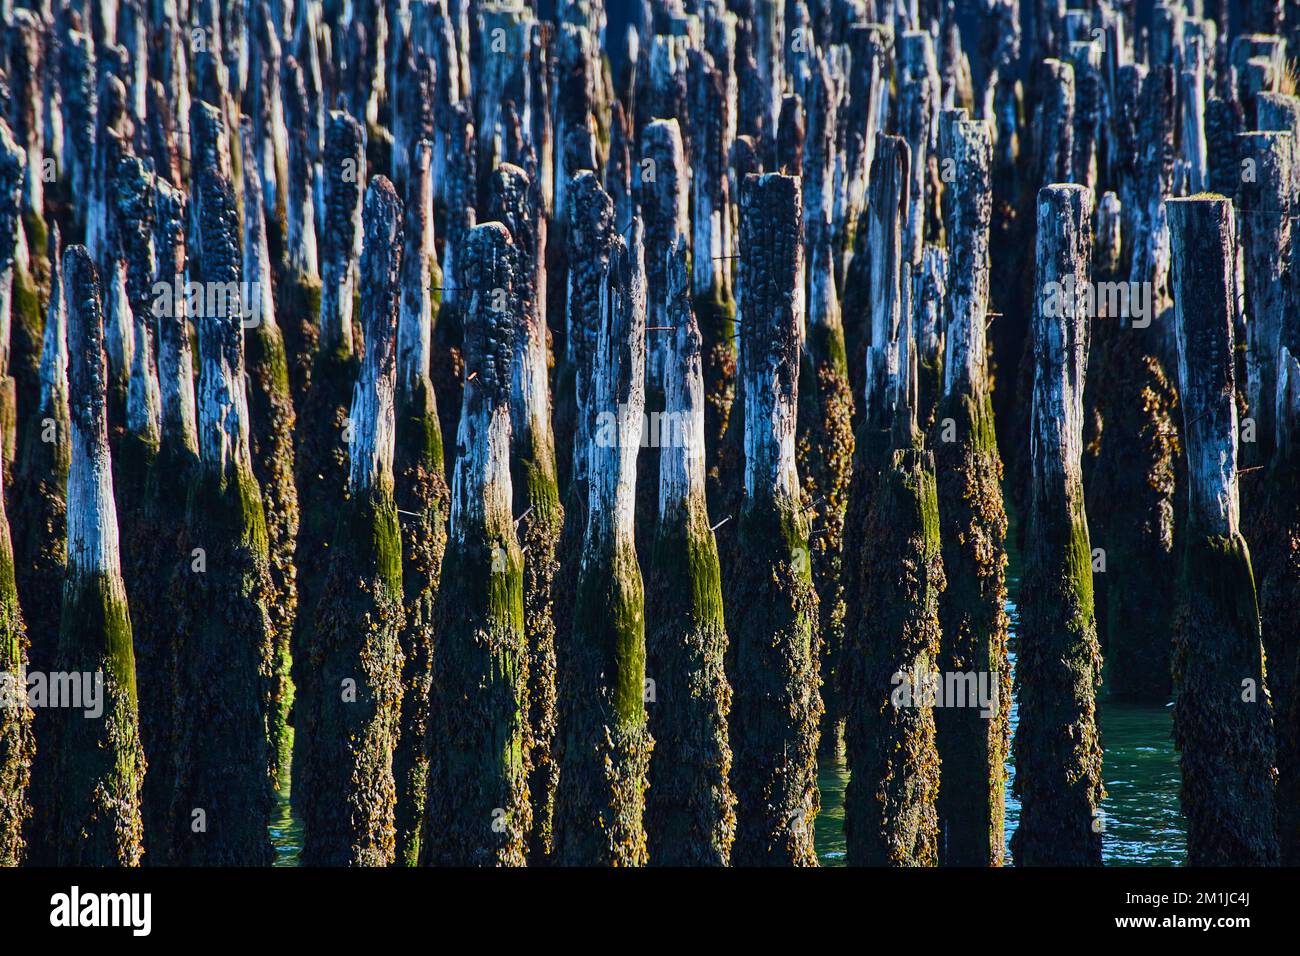 Detailed collection of dozens of old wood pilings covered in moss Stock Photo